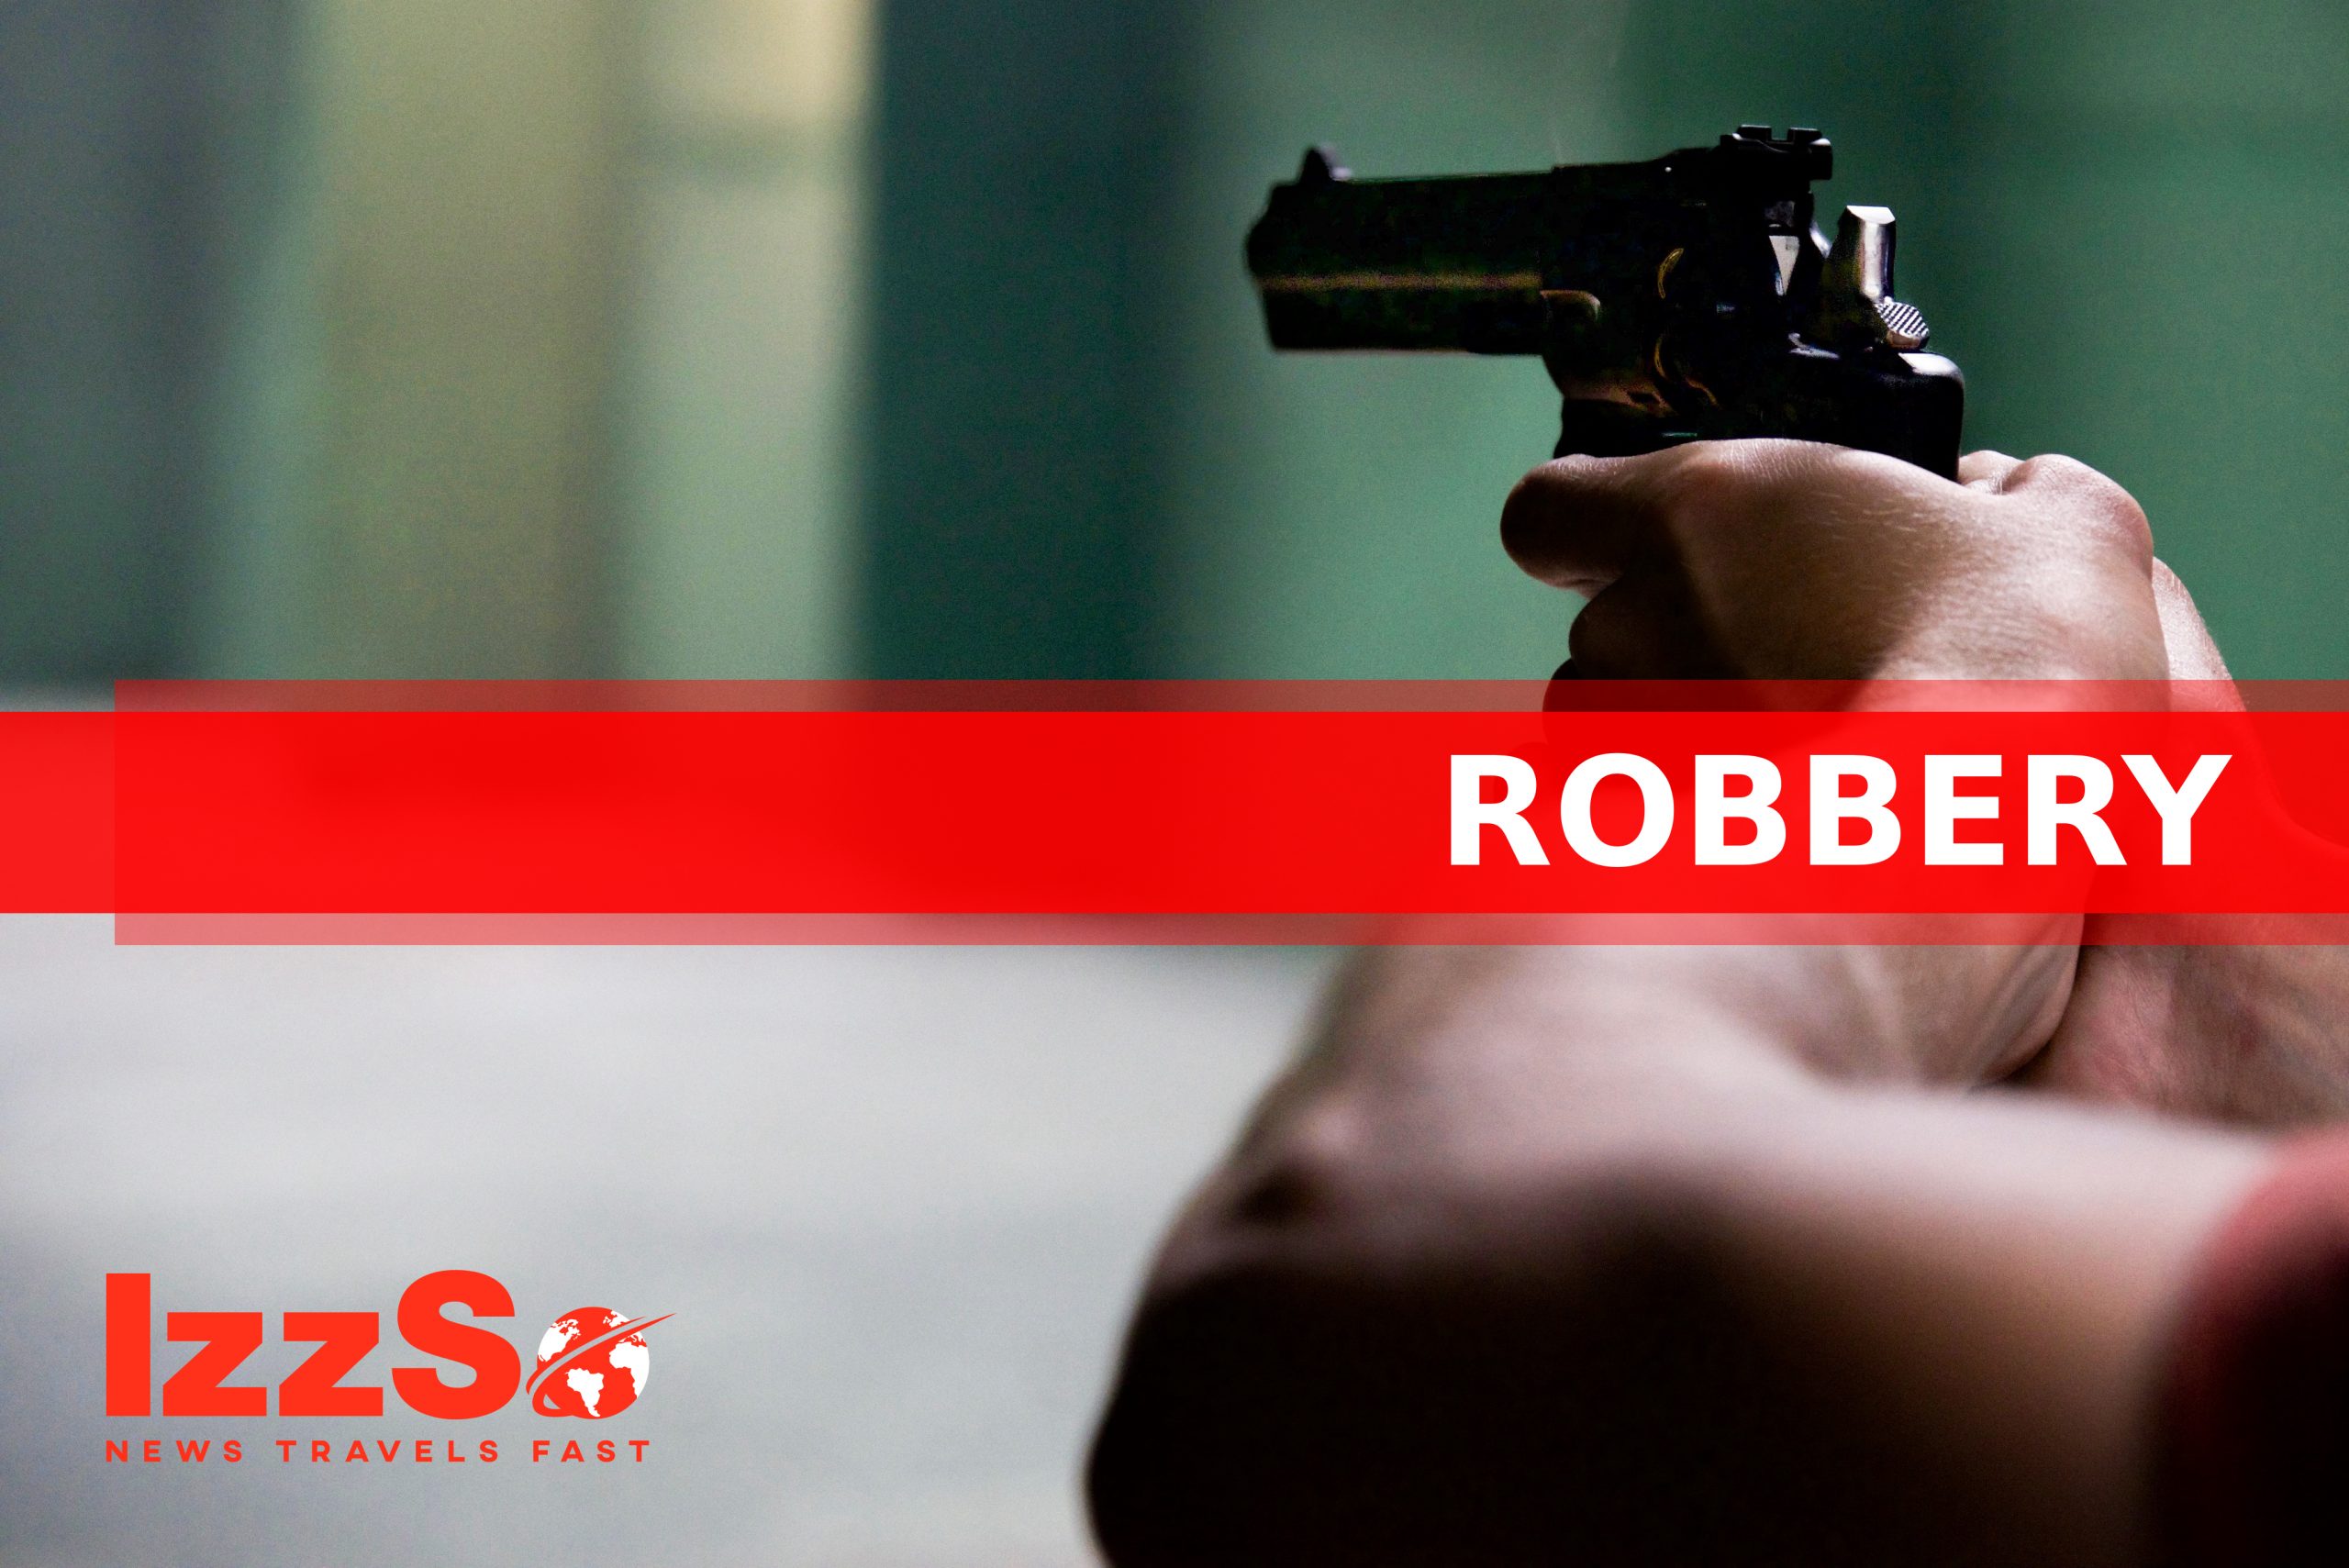 Barrackpore gas station robbed